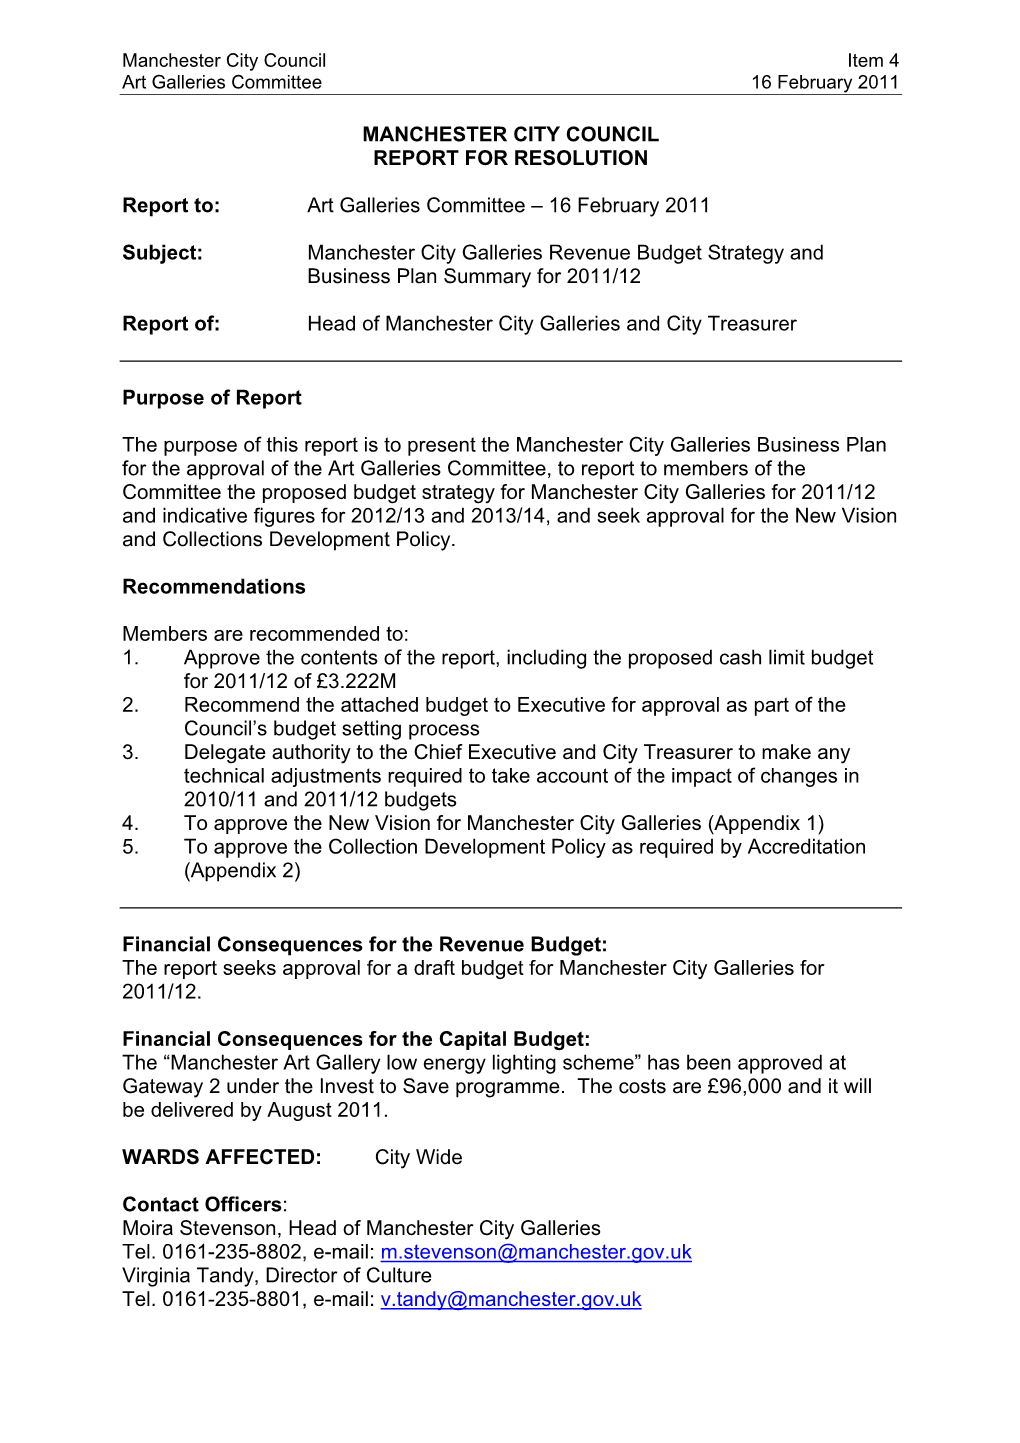 Report on Budget Strategy for Art Galleries Committee 16 February